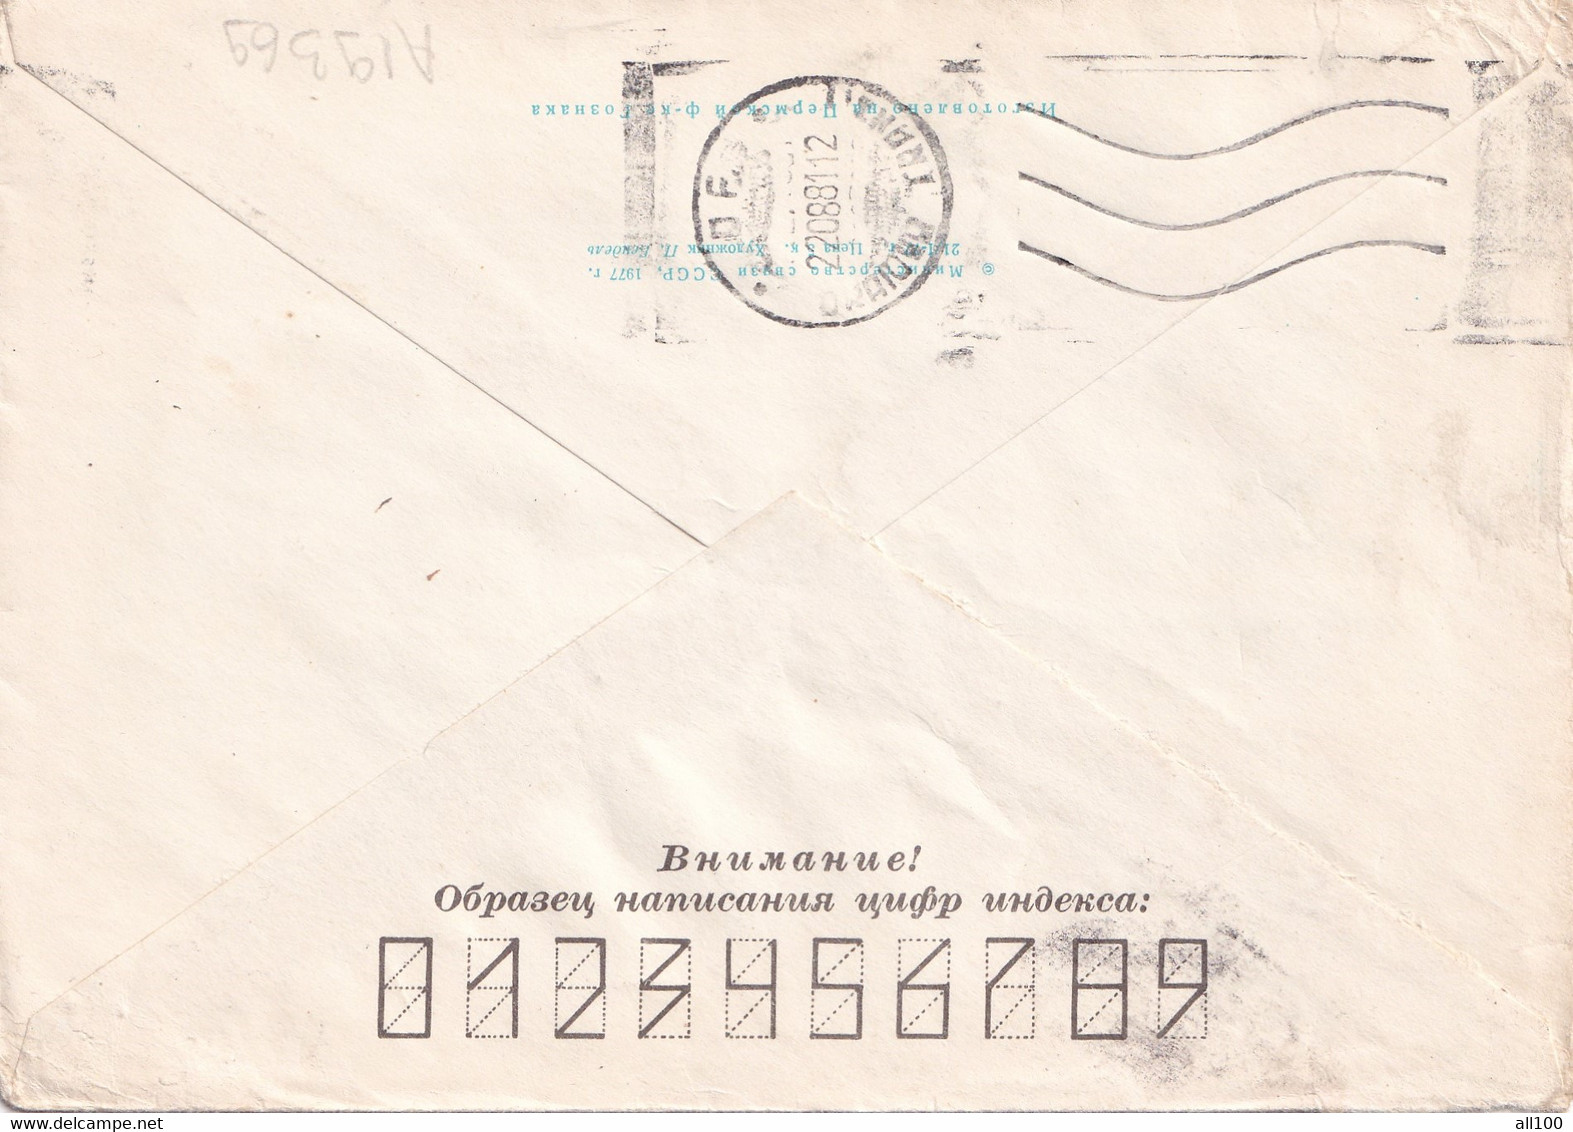 A19369 - A S NOVIKOV RUSSIAN SOVIET WRITER COVER ENVELOPE USED 1981 SOVIET UNION USSR SENT TO CRAIOVA ROMANIA RSR - Covers & Documents